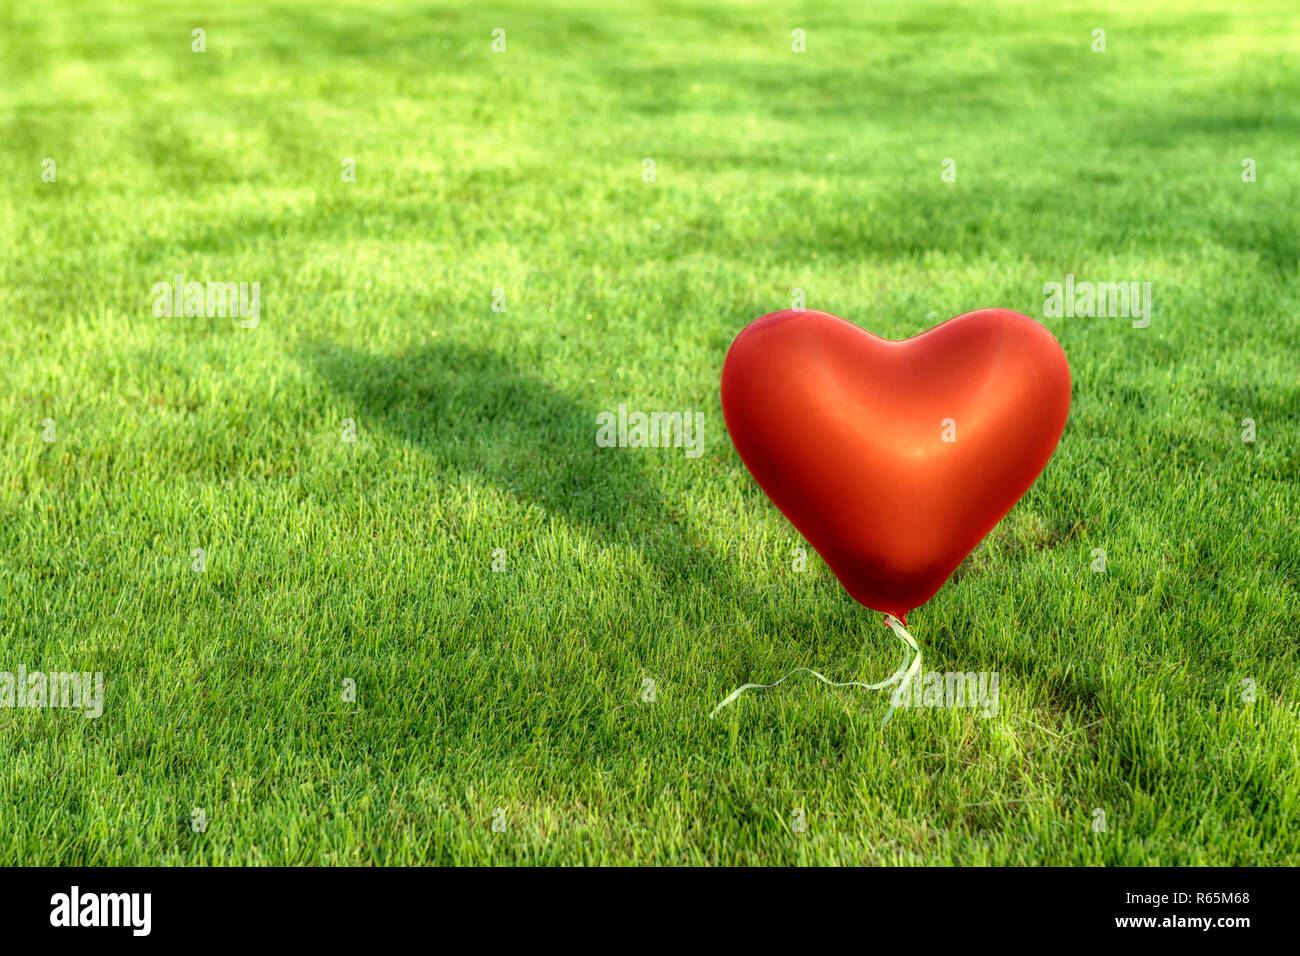 heart shaped red balloon in front of green meadow Stock Photo